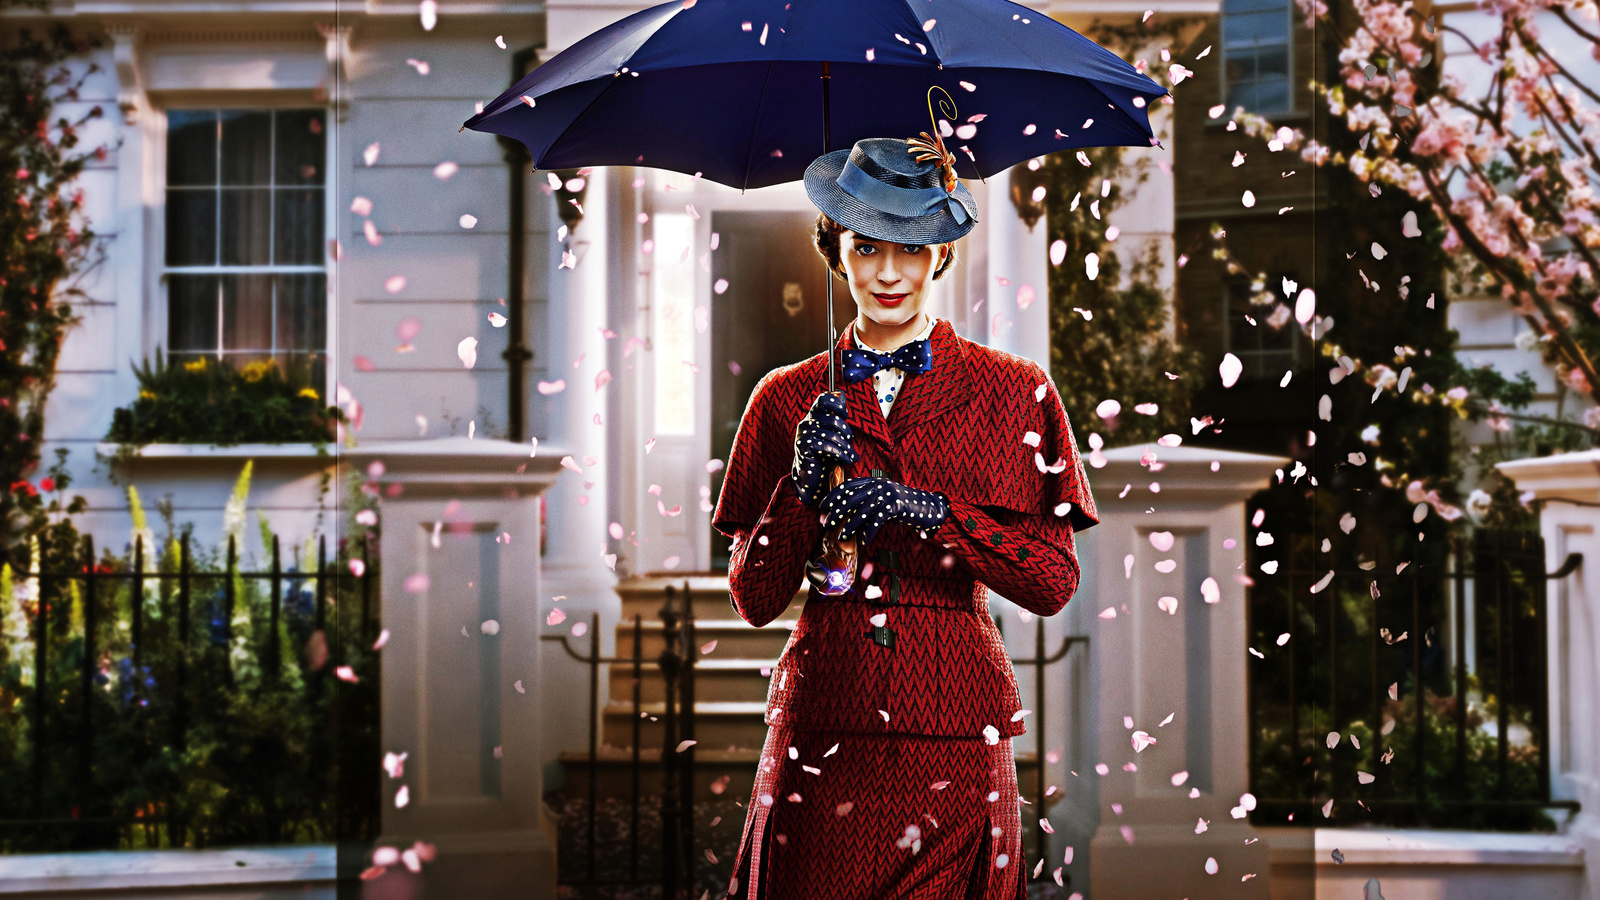 mary poppins returns, promotional materials, main character, emily blunt